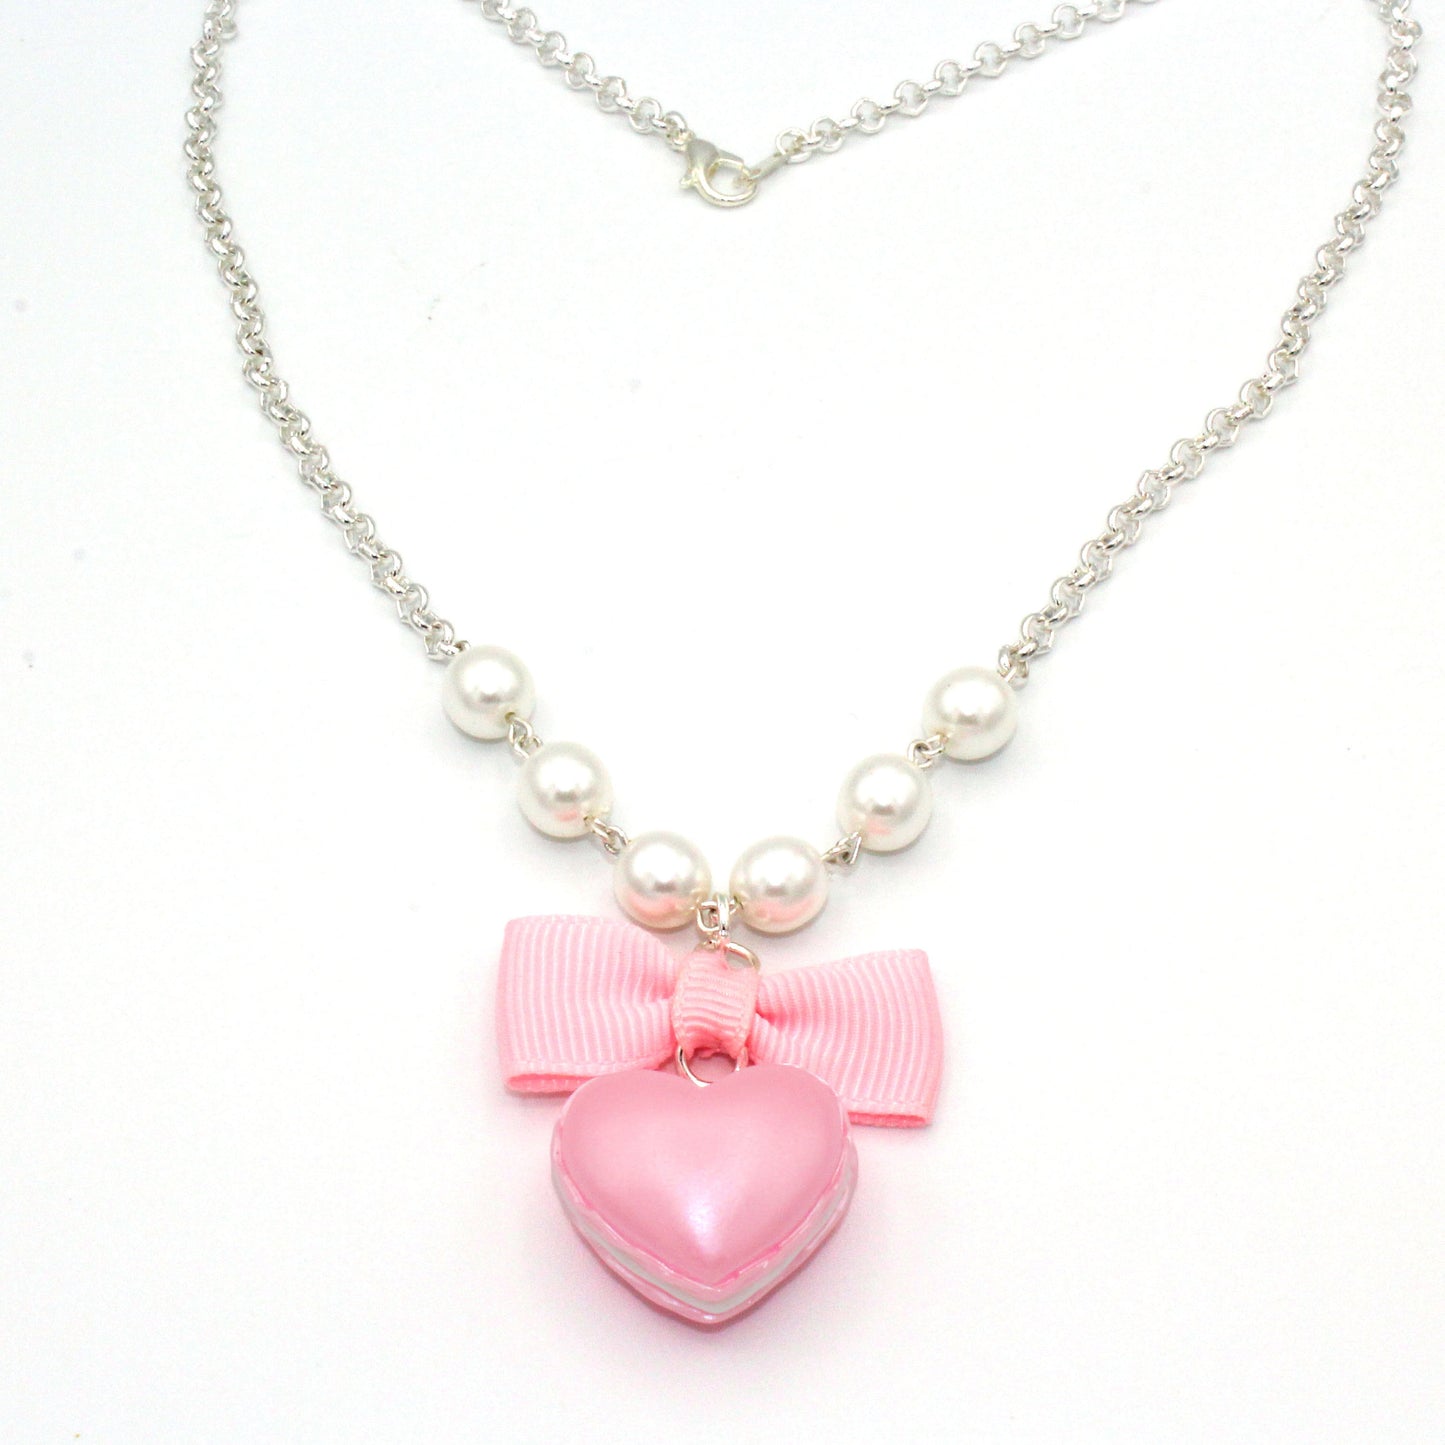 Macaron Heart Necklace - Pink, Purple or Mint Green - Valentines Day Necklace